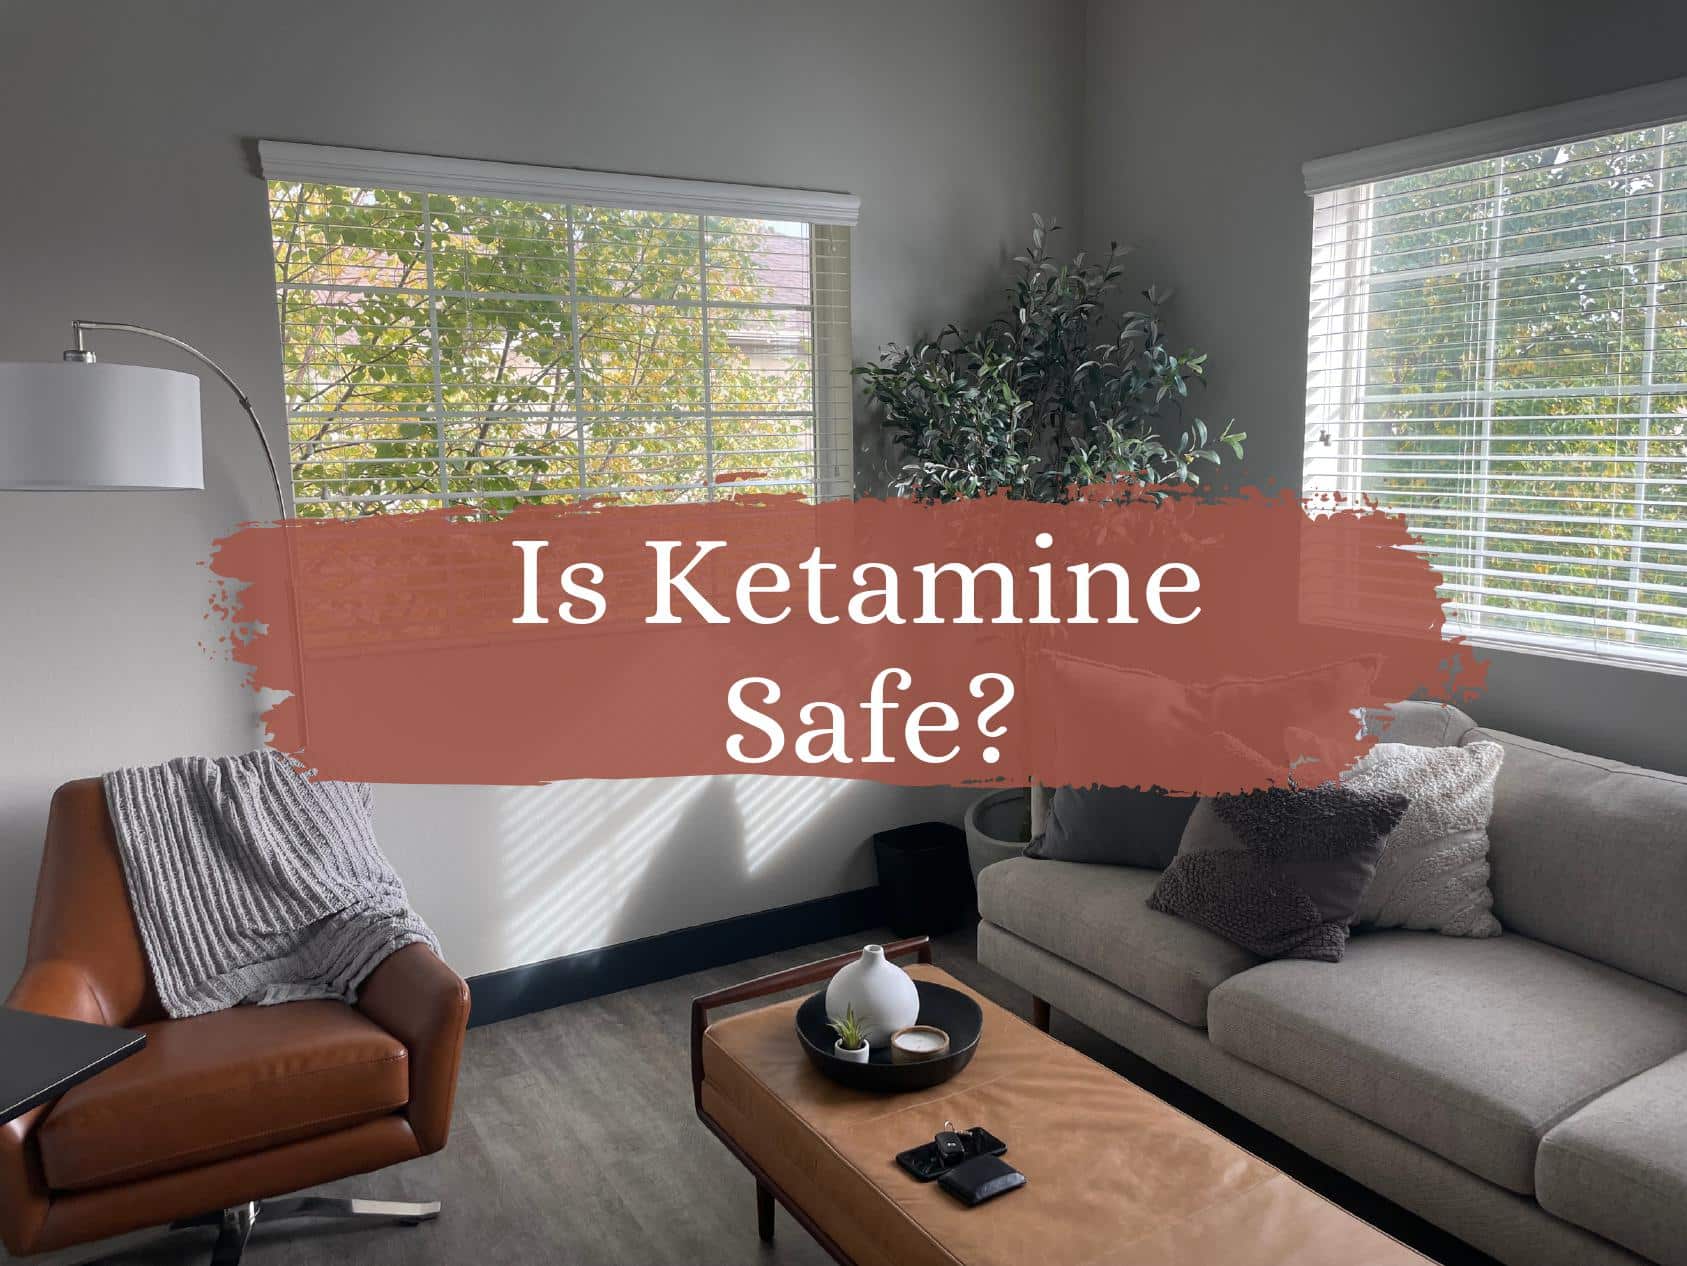 image of interior of ketamine clinic with a heading that says "is ketamine safe?"